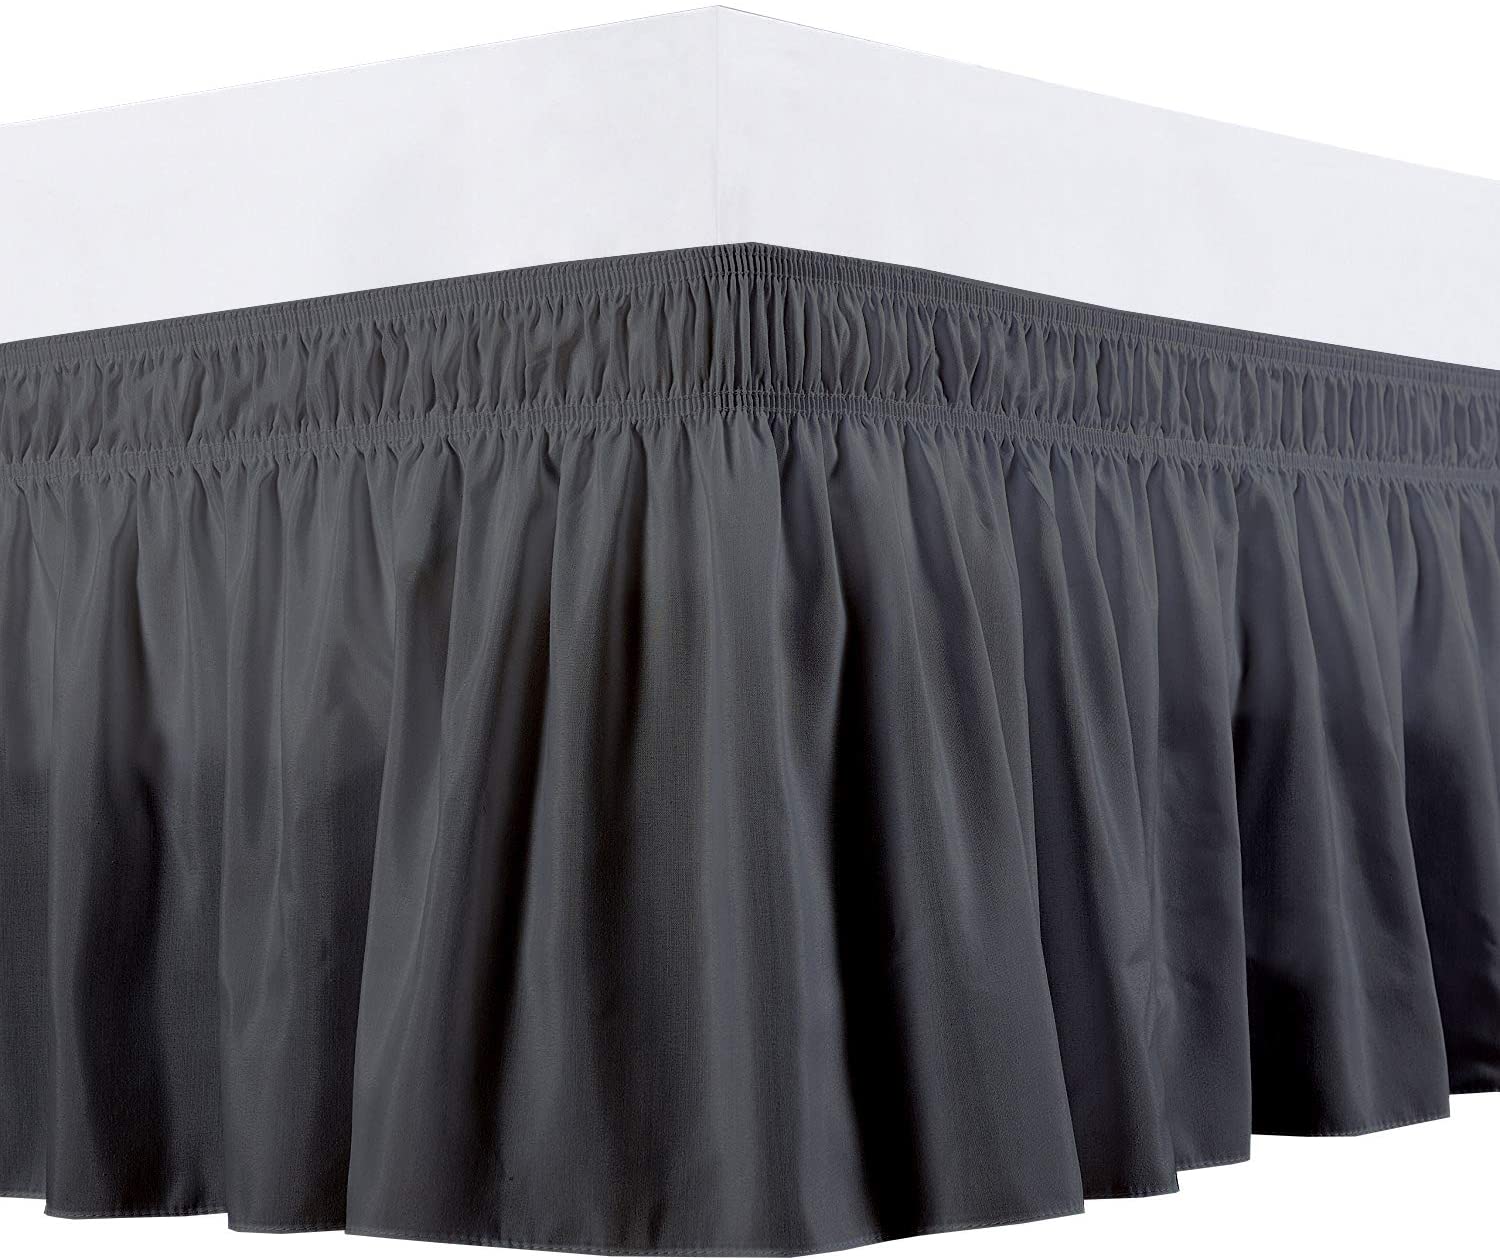 Details about   Premium Wrap Around Bed Skirt Elastic Dust Ruffle Three Fabric Sides Wrinkle Du 